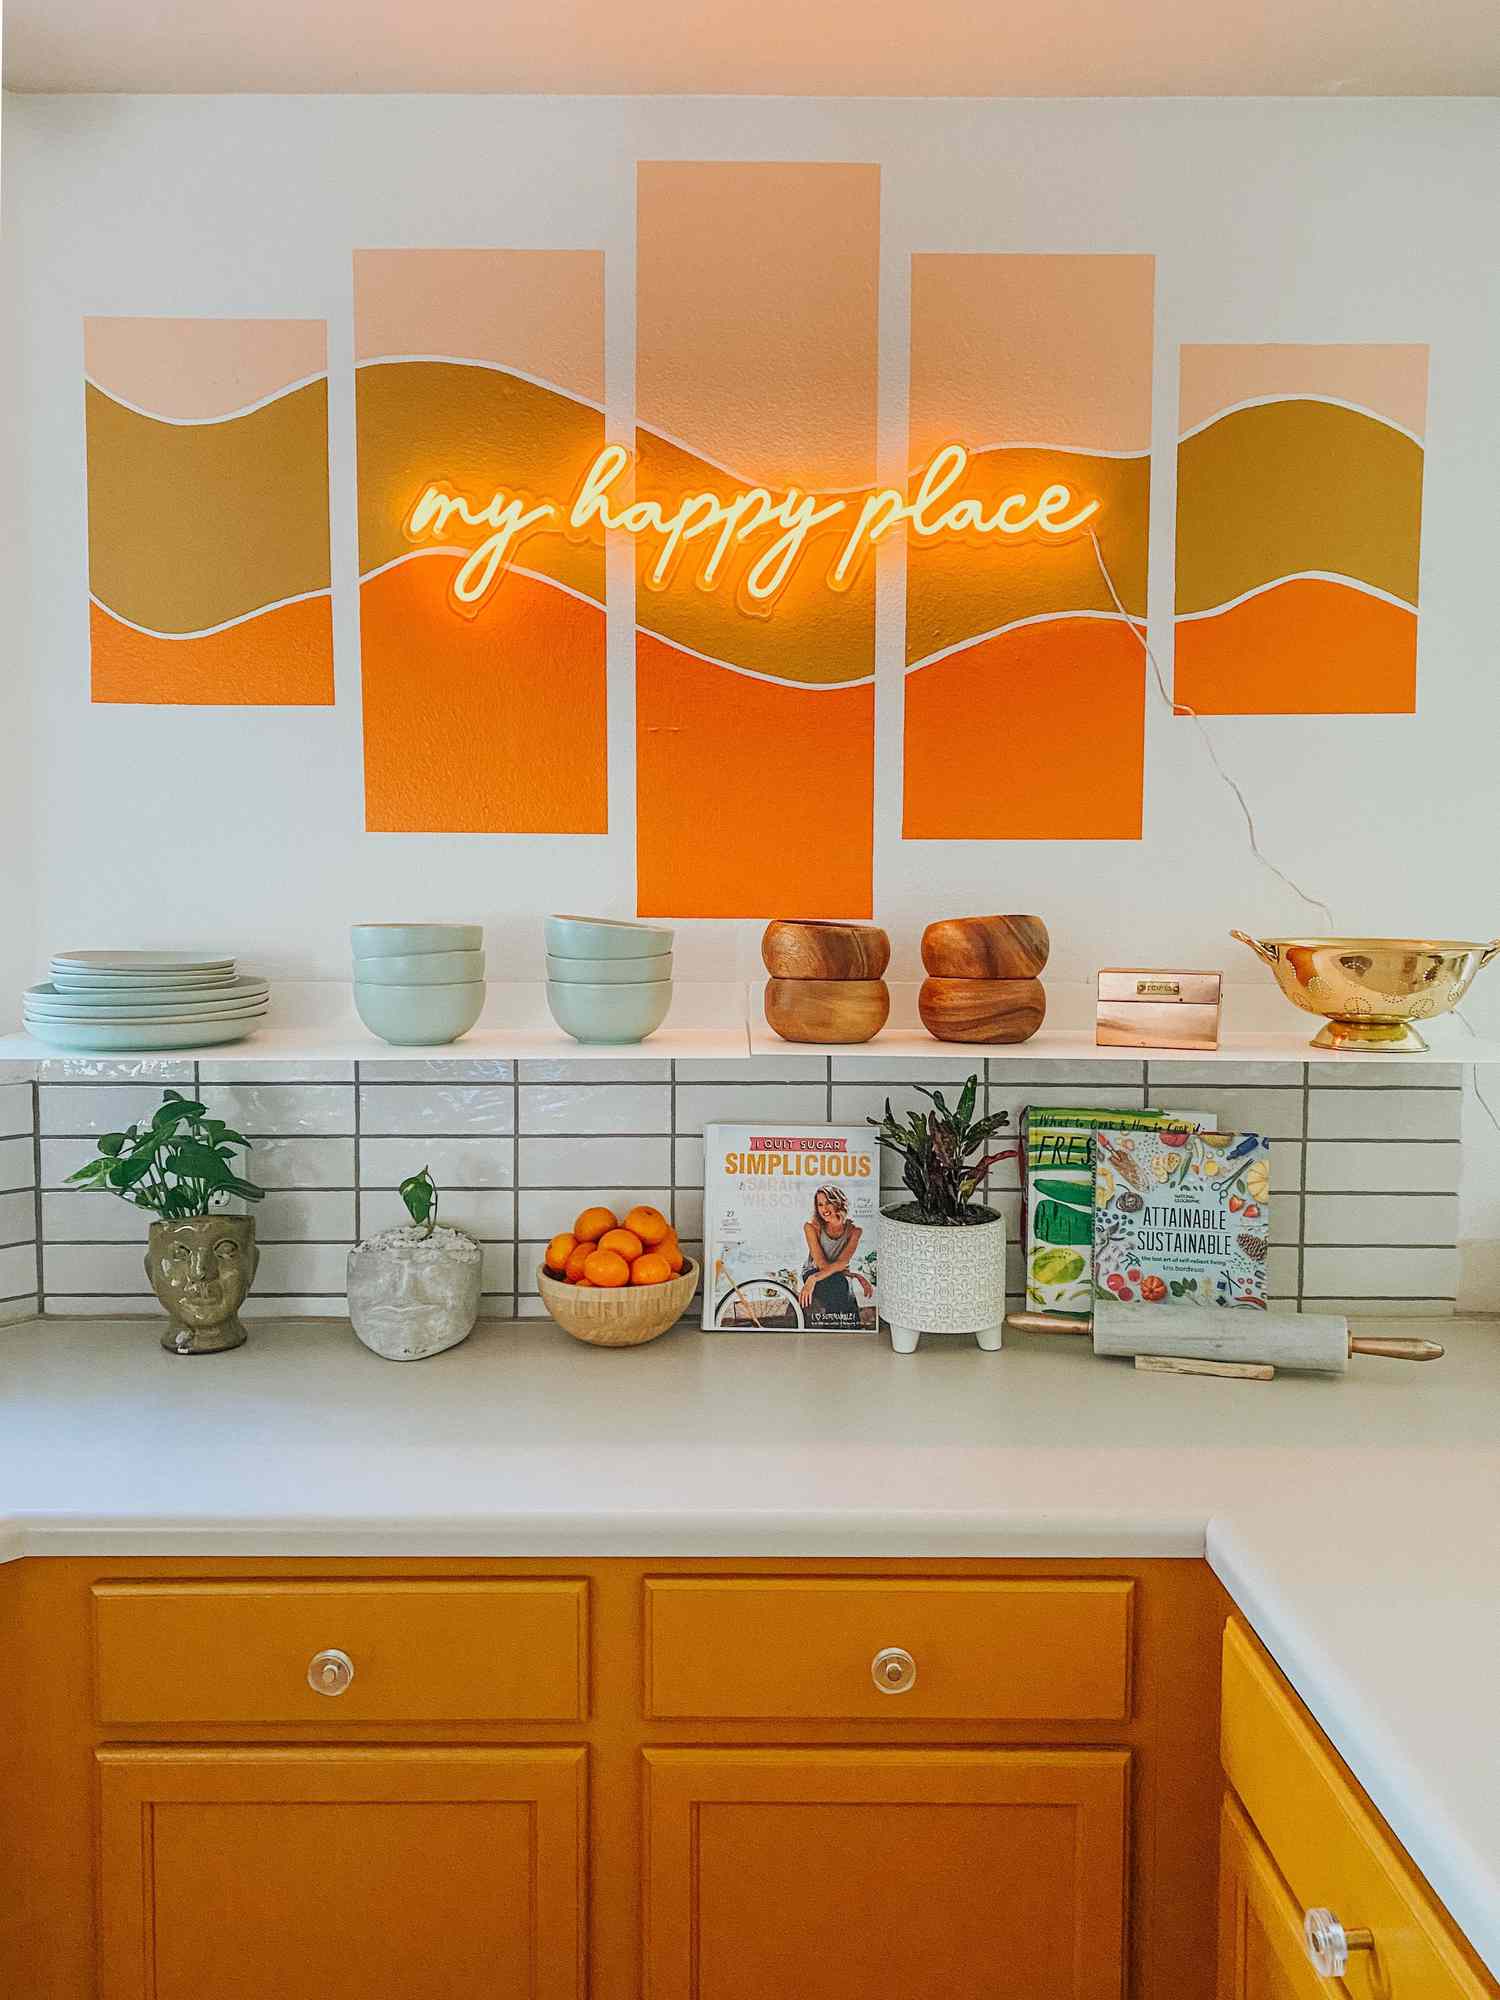 Tangerine orange colored kitchen cabinets are paired against a peach mural with a neon sign in peach